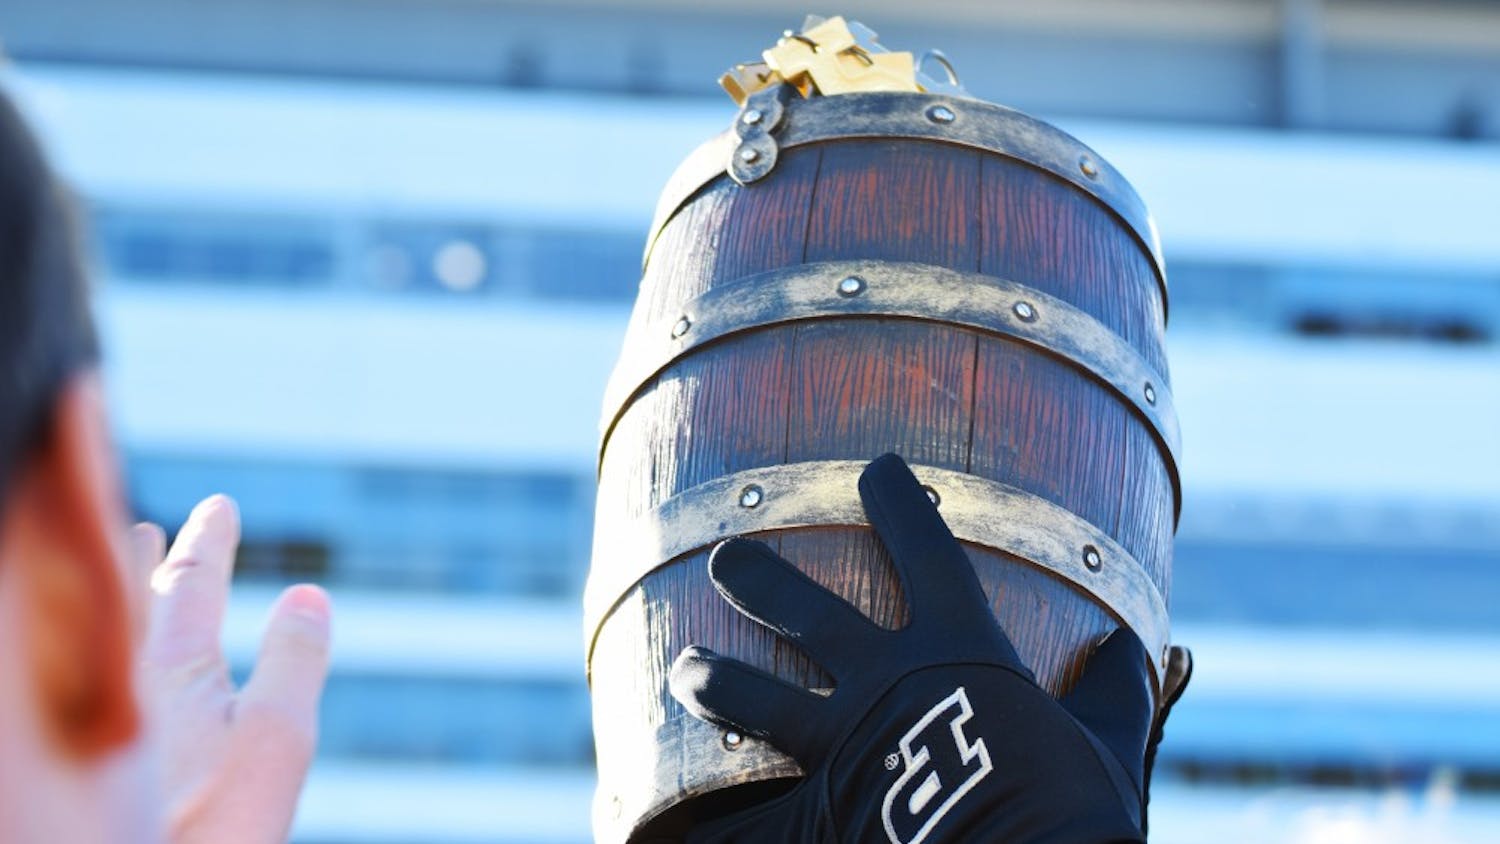 A Purdue team member holds the Old Oaken Bucket Nov. 25 at Ross-Ade Stadium after Purdue defeated IU for the first time since 2012. Both IU and Purdue will need a win in this year's battle to reach a bowl game.